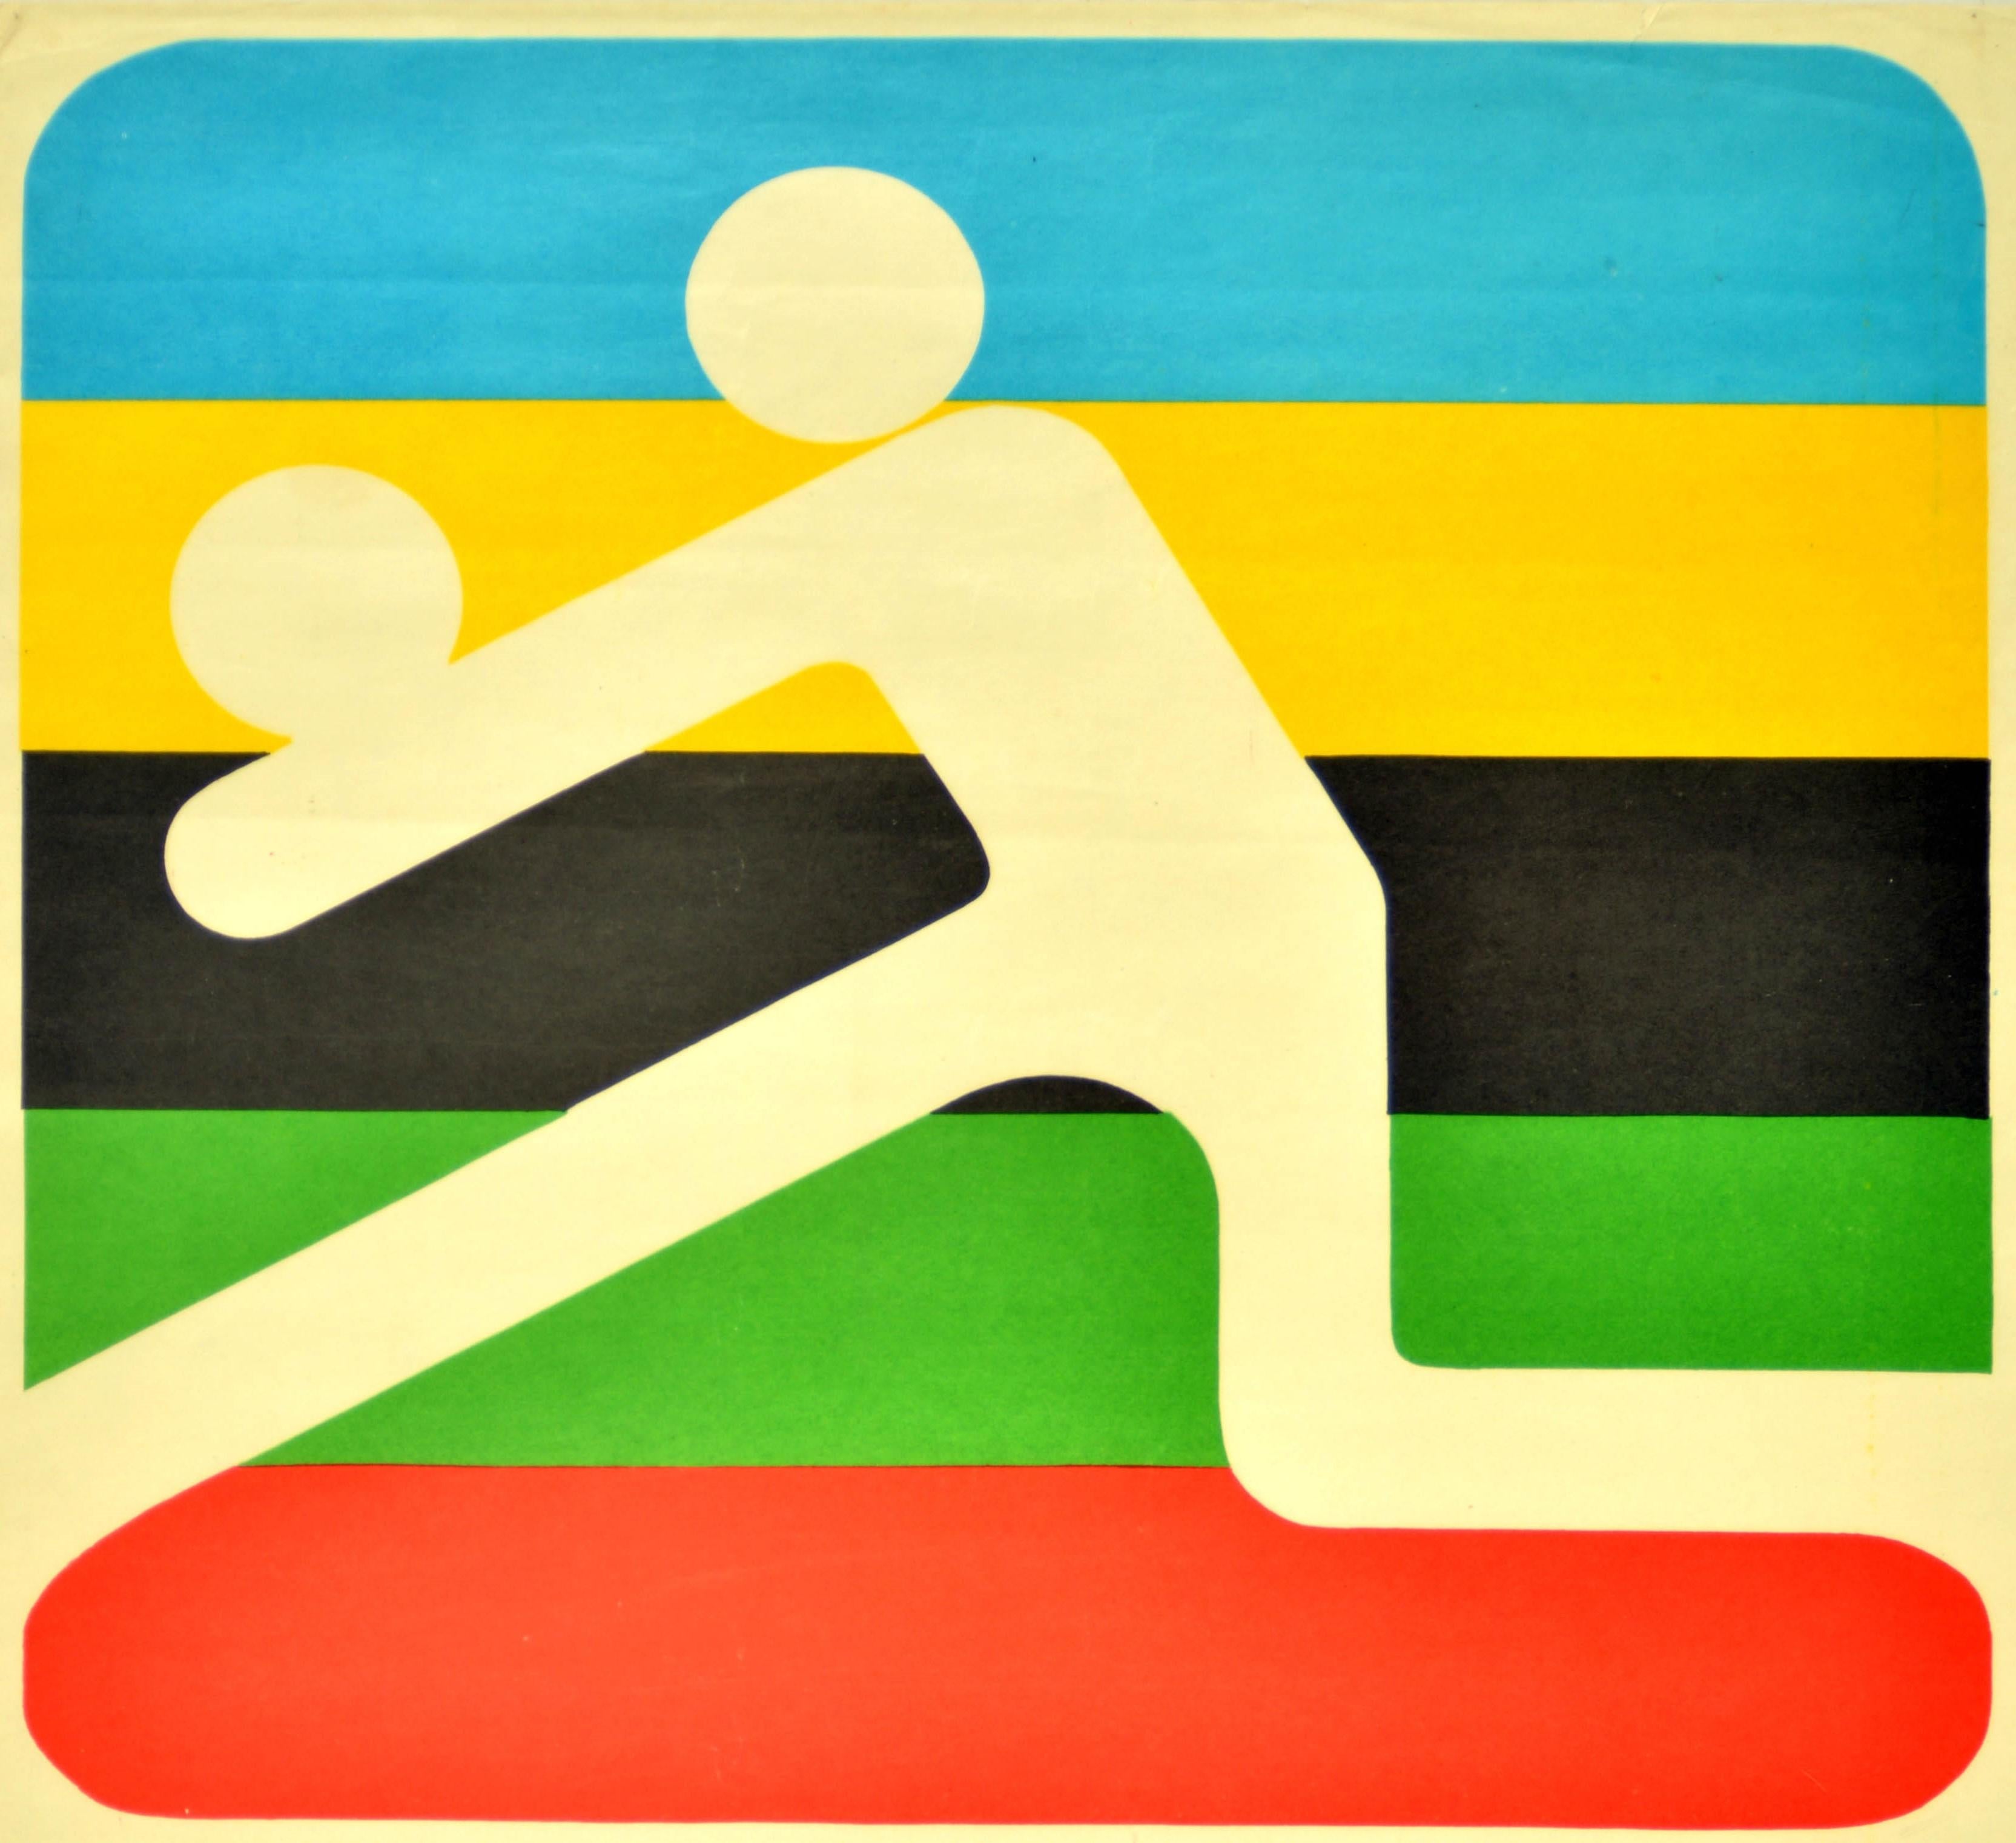 Original vintage sport poster promoting volleyball at the 22nd Summer Olympic Games / Games of the XXII Olympiad in 1980 held in Moscow Russia featuring a colorful pictogram design for Olympic volleyball against a striped background of the five